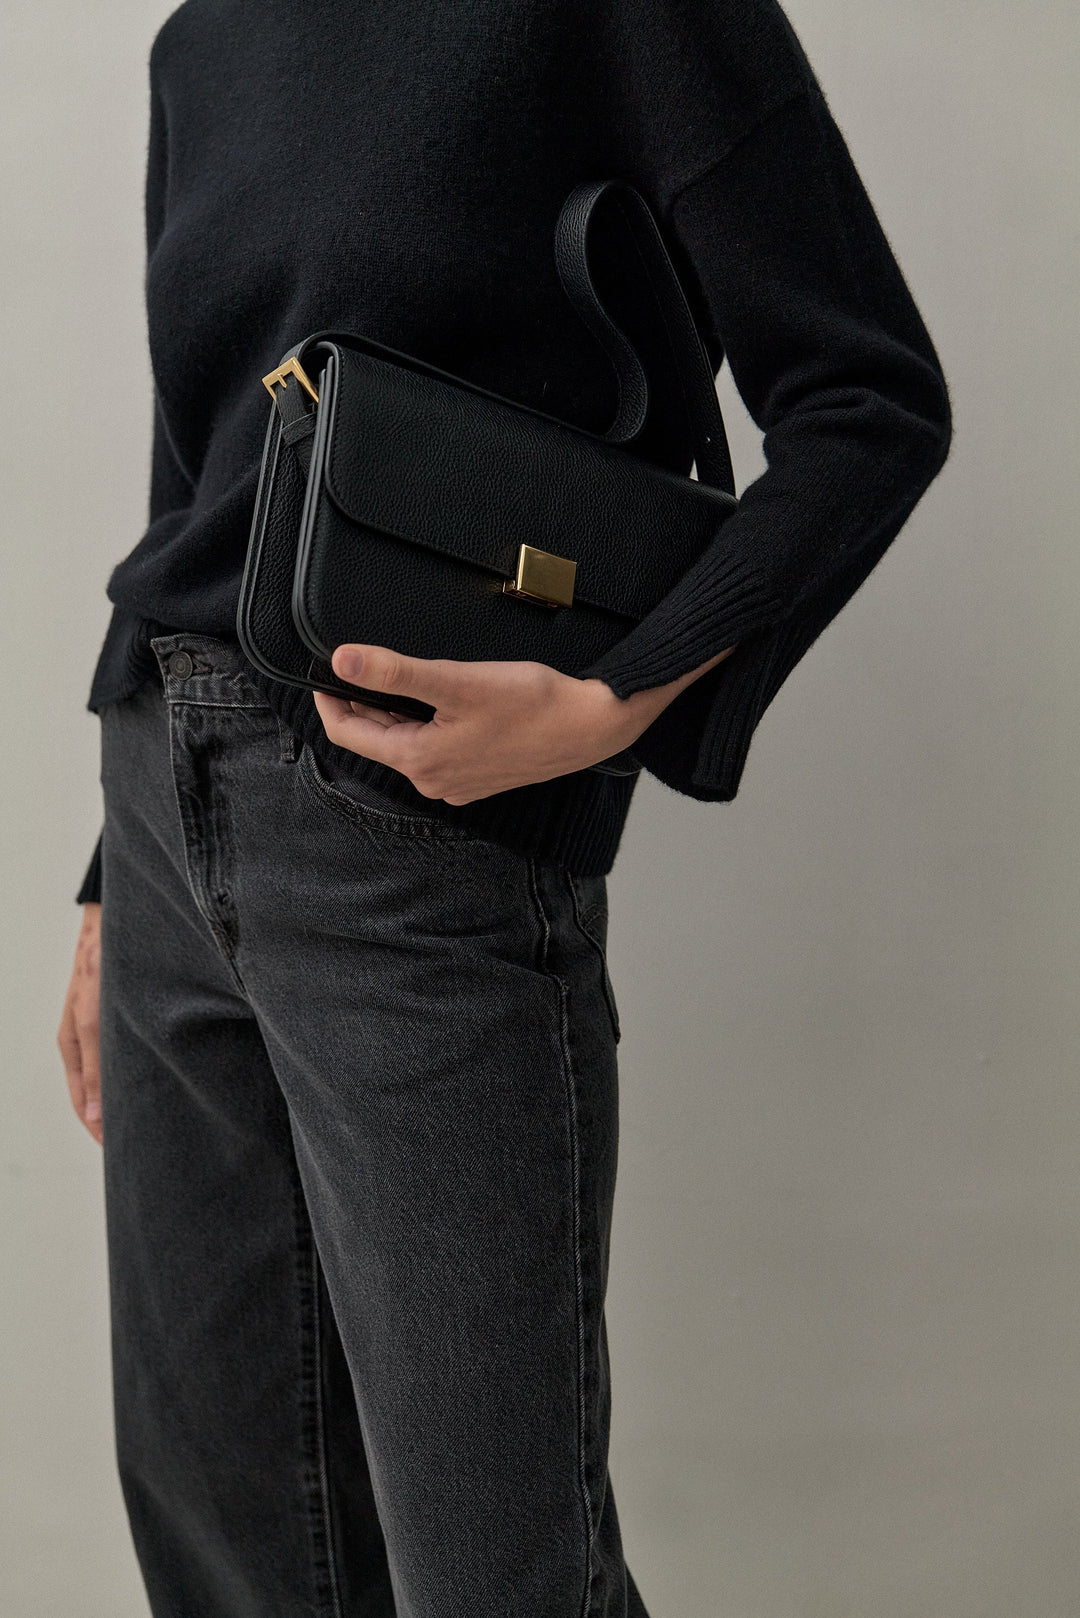 THE CLASSIC SHOULDER BAG - PEBBLE – THE CURATED